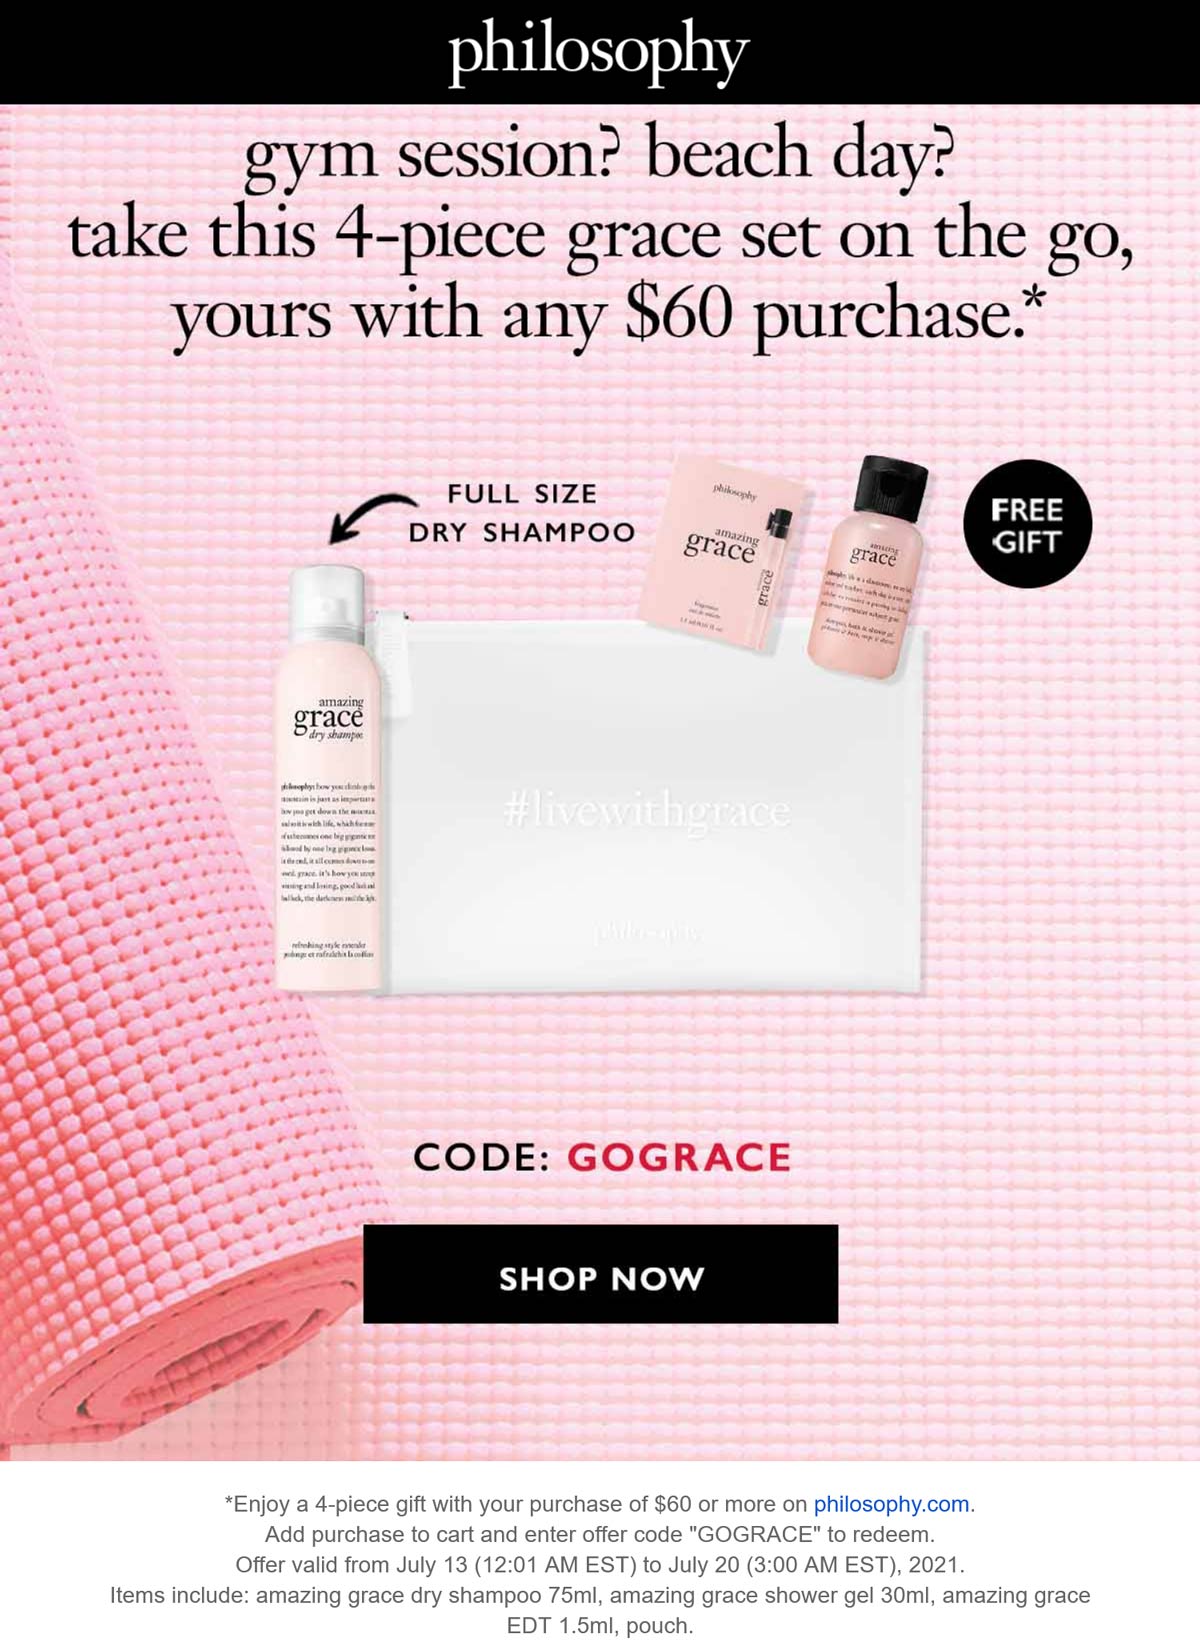 Philosophy stores Coupon  Free 4pc with $60 spent today at Philosophy via promo code GOGRACE #philosophy 